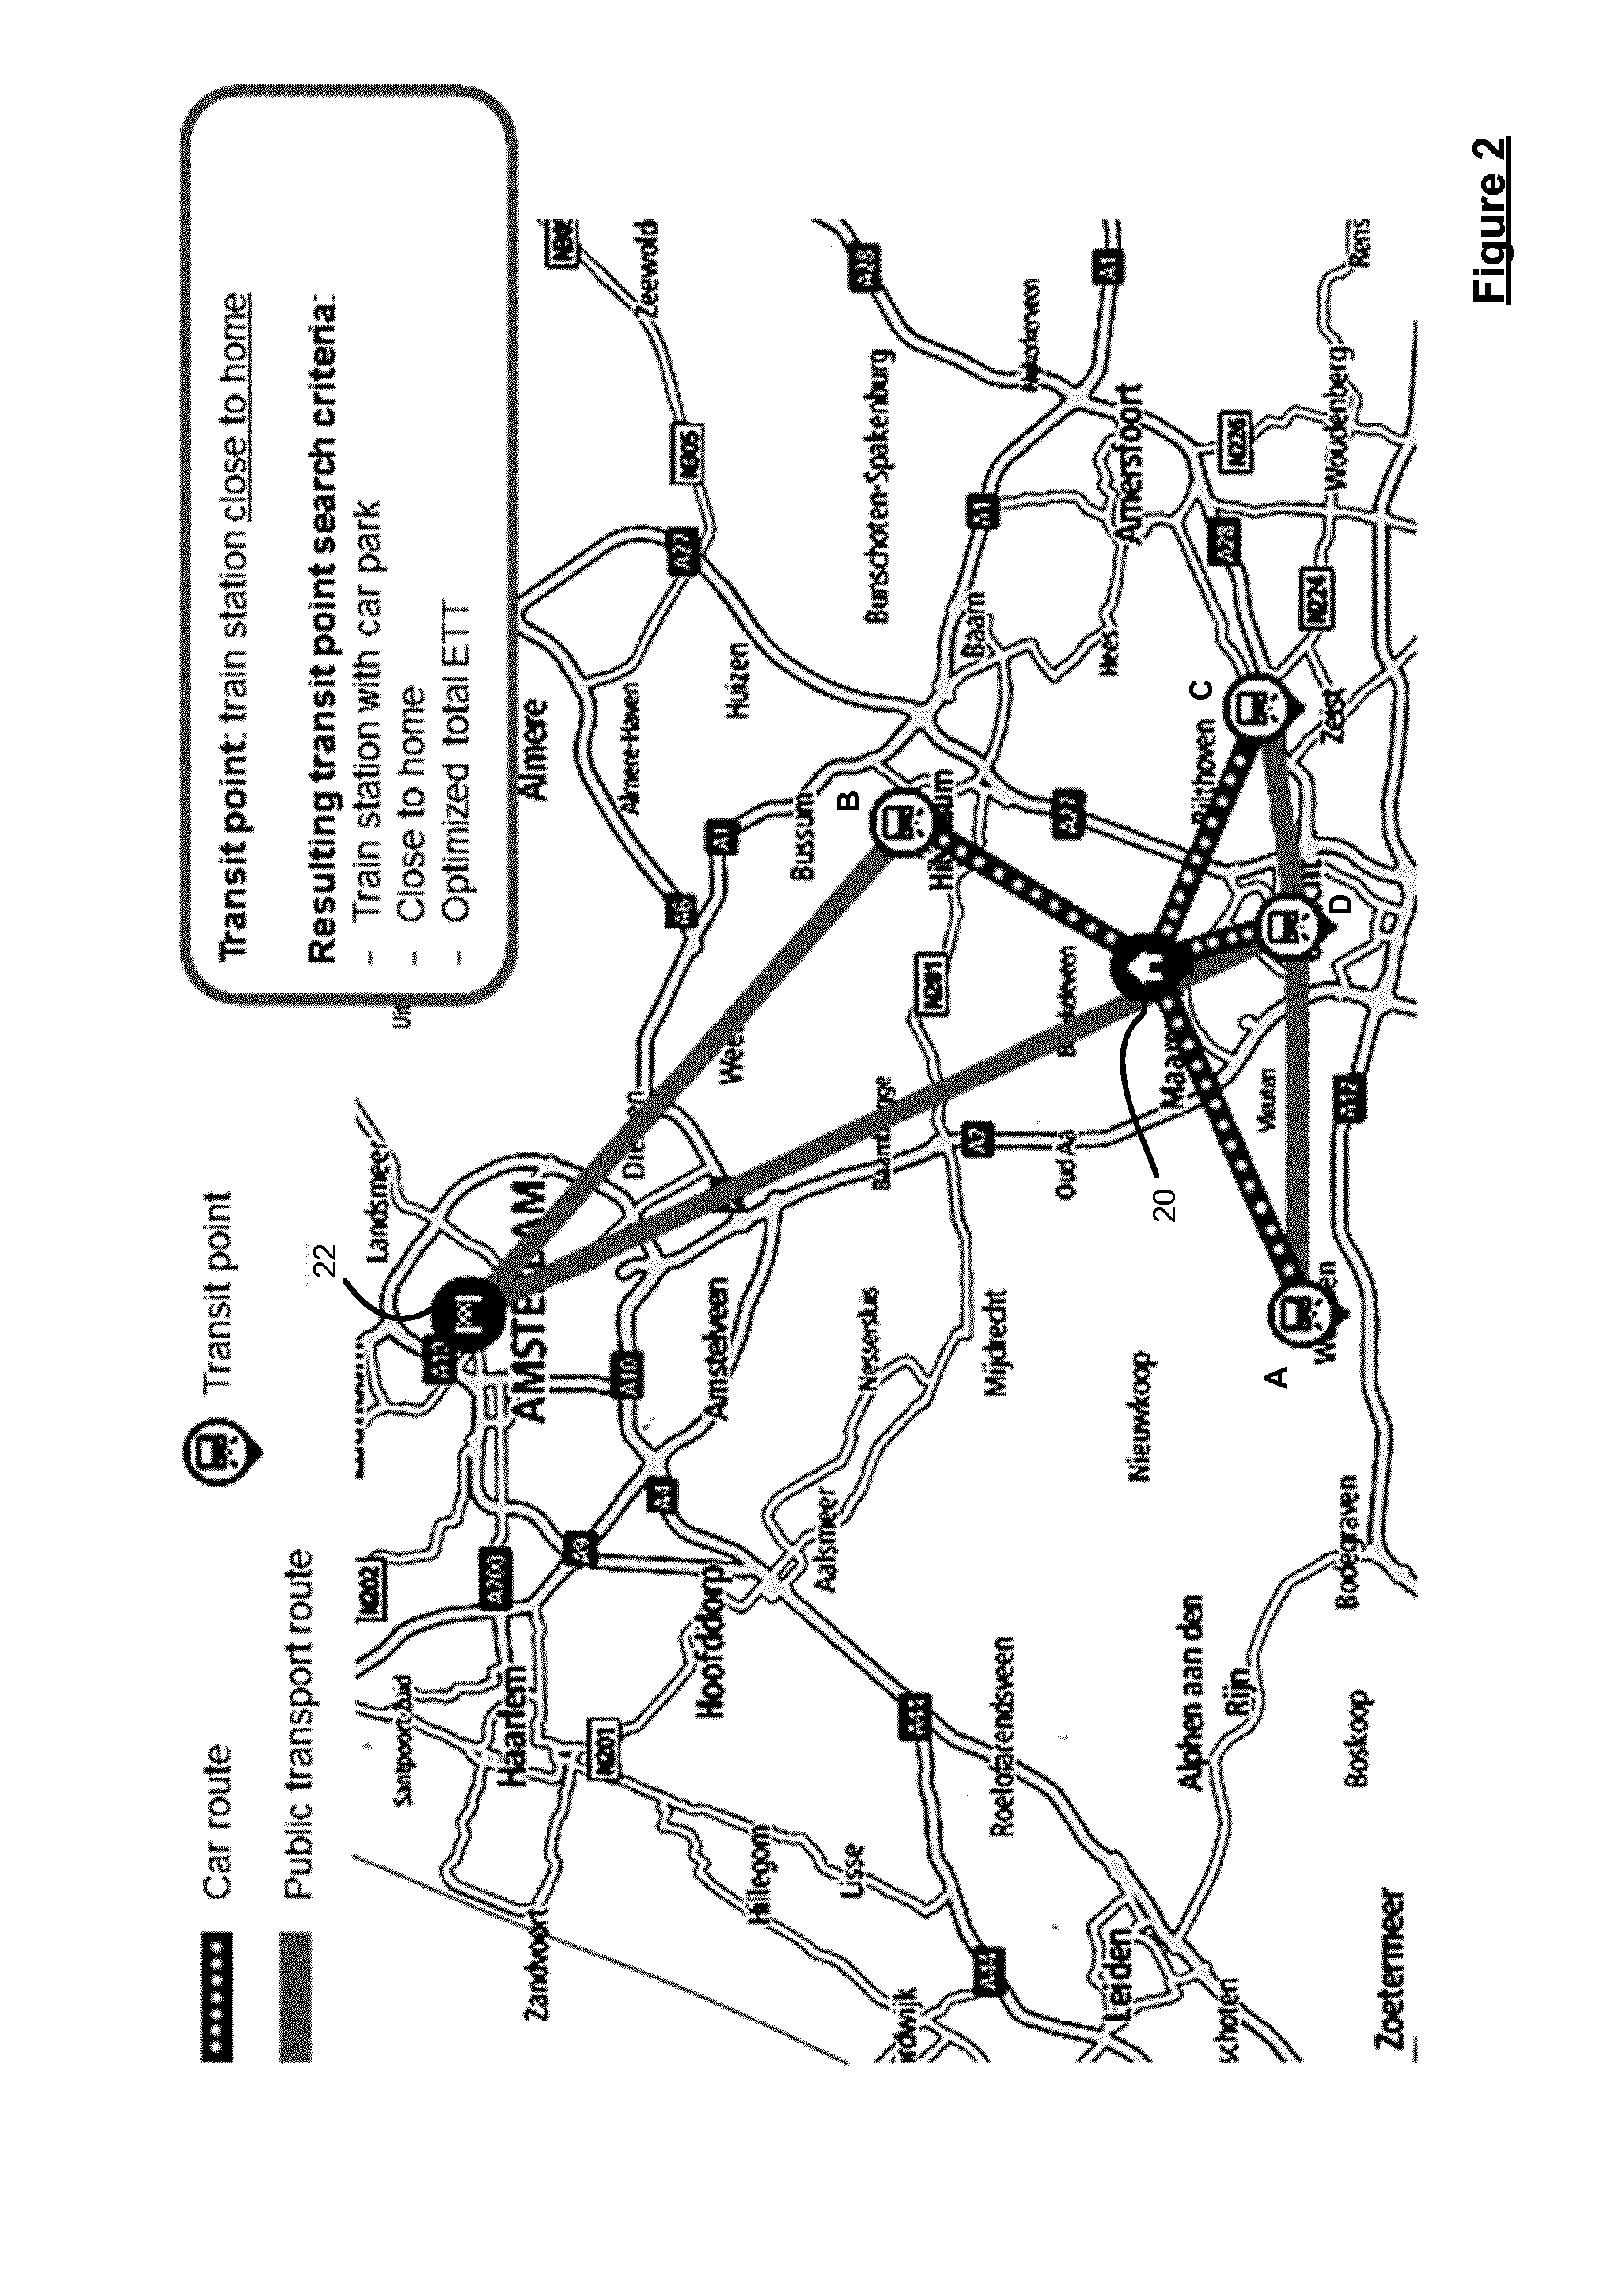 Methods and systems for obtaining a multi-modal route